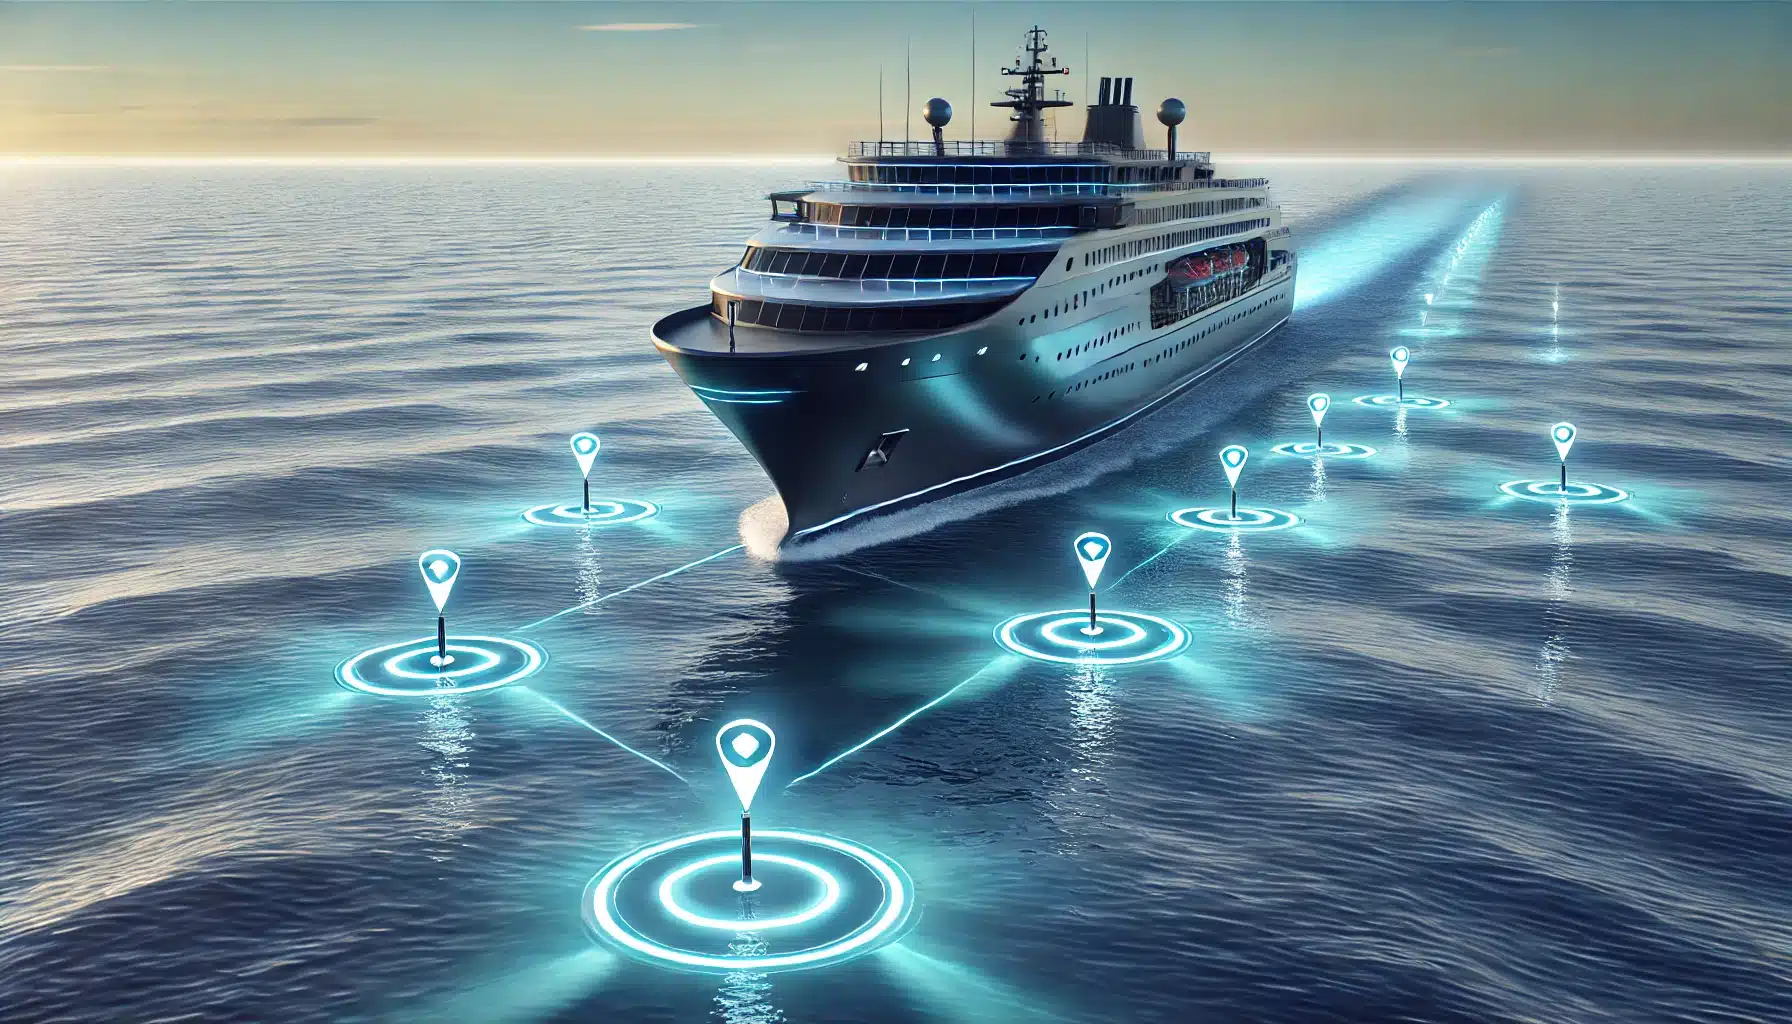 A-large-ship-sailing-on-the-ocean-equipped-with-advanced-technology-indicating-autonomous-navigation.